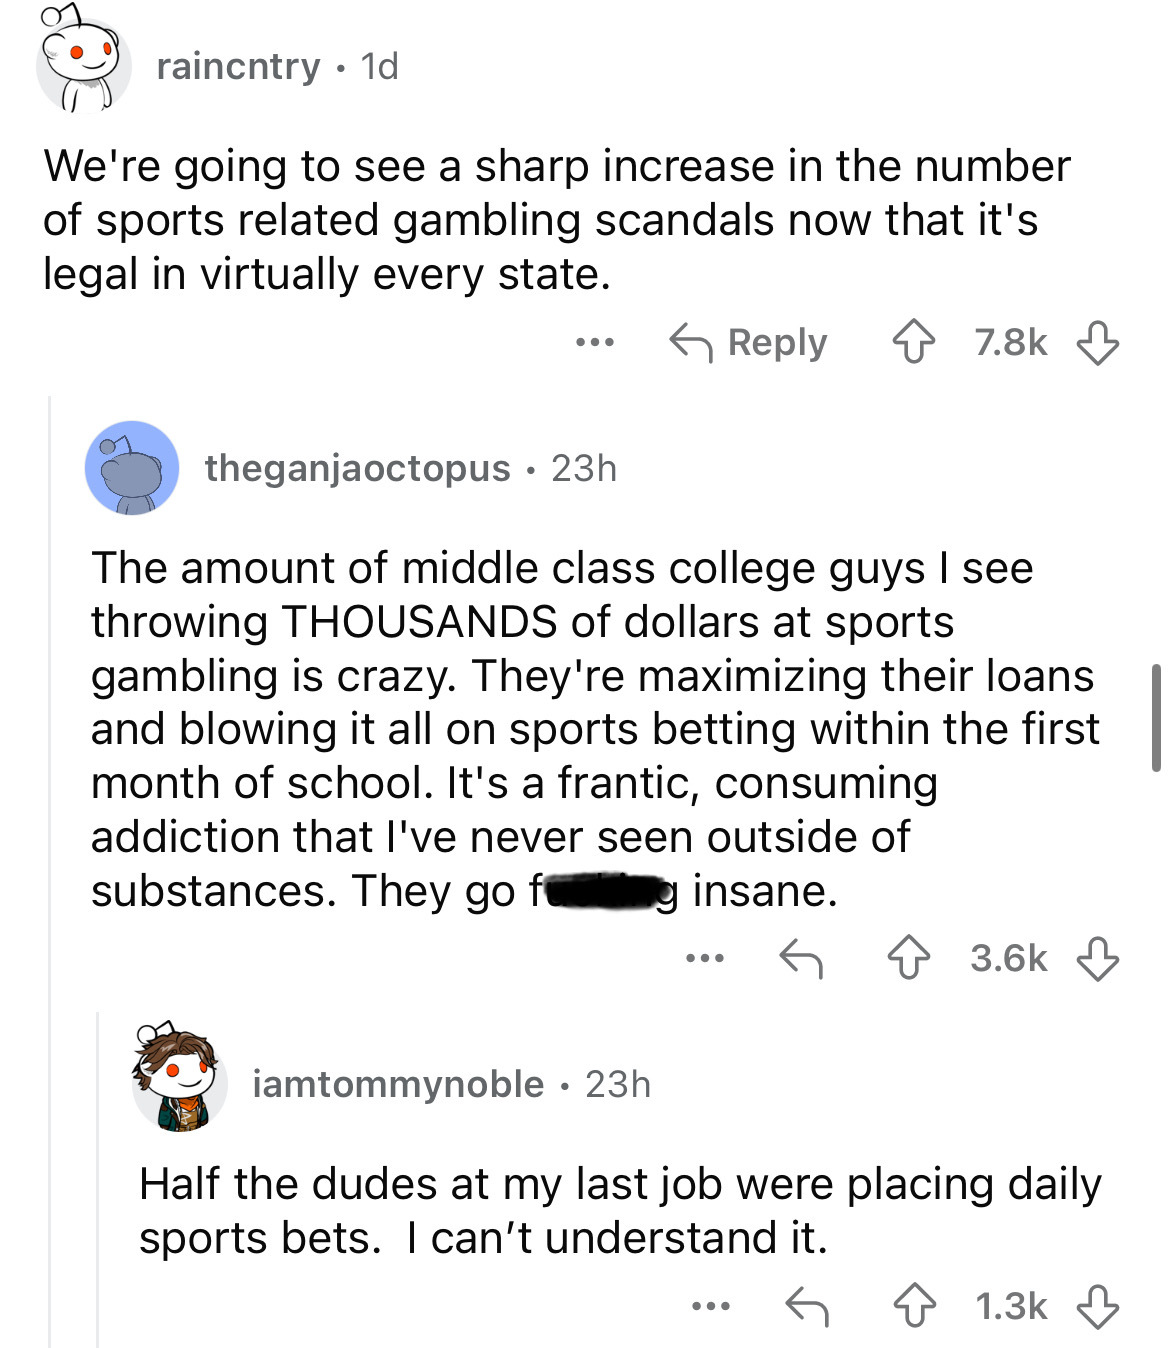 screenshot - raincntry 1d We're going to see a sharp increase in the number of sports related gambling scandals now that it's legal in virtually every state. ... theganjaoctopus 23h . The amount of middle class college guys I see throwing Thousands of dol